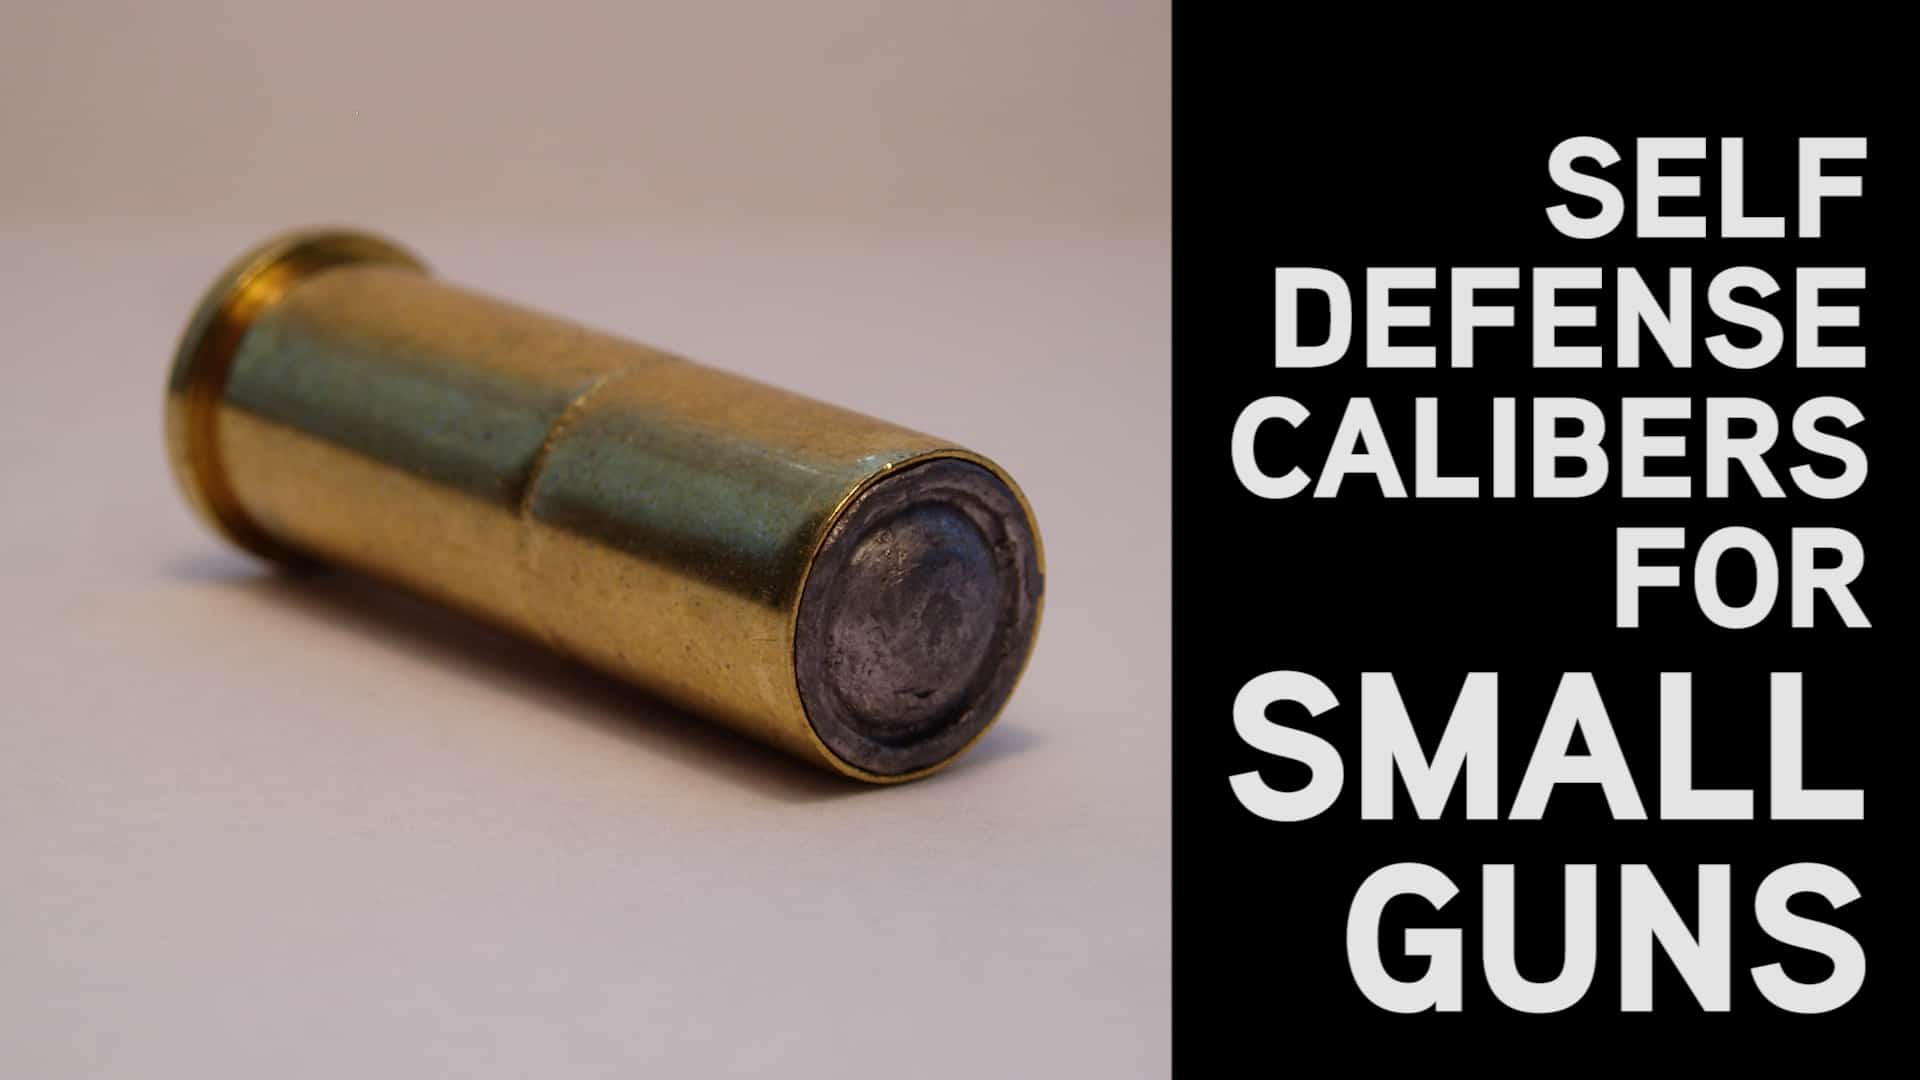 image of ammunition with text that reads self defense calibers for small guns; gun cranks live episode wadcutters for self defense?